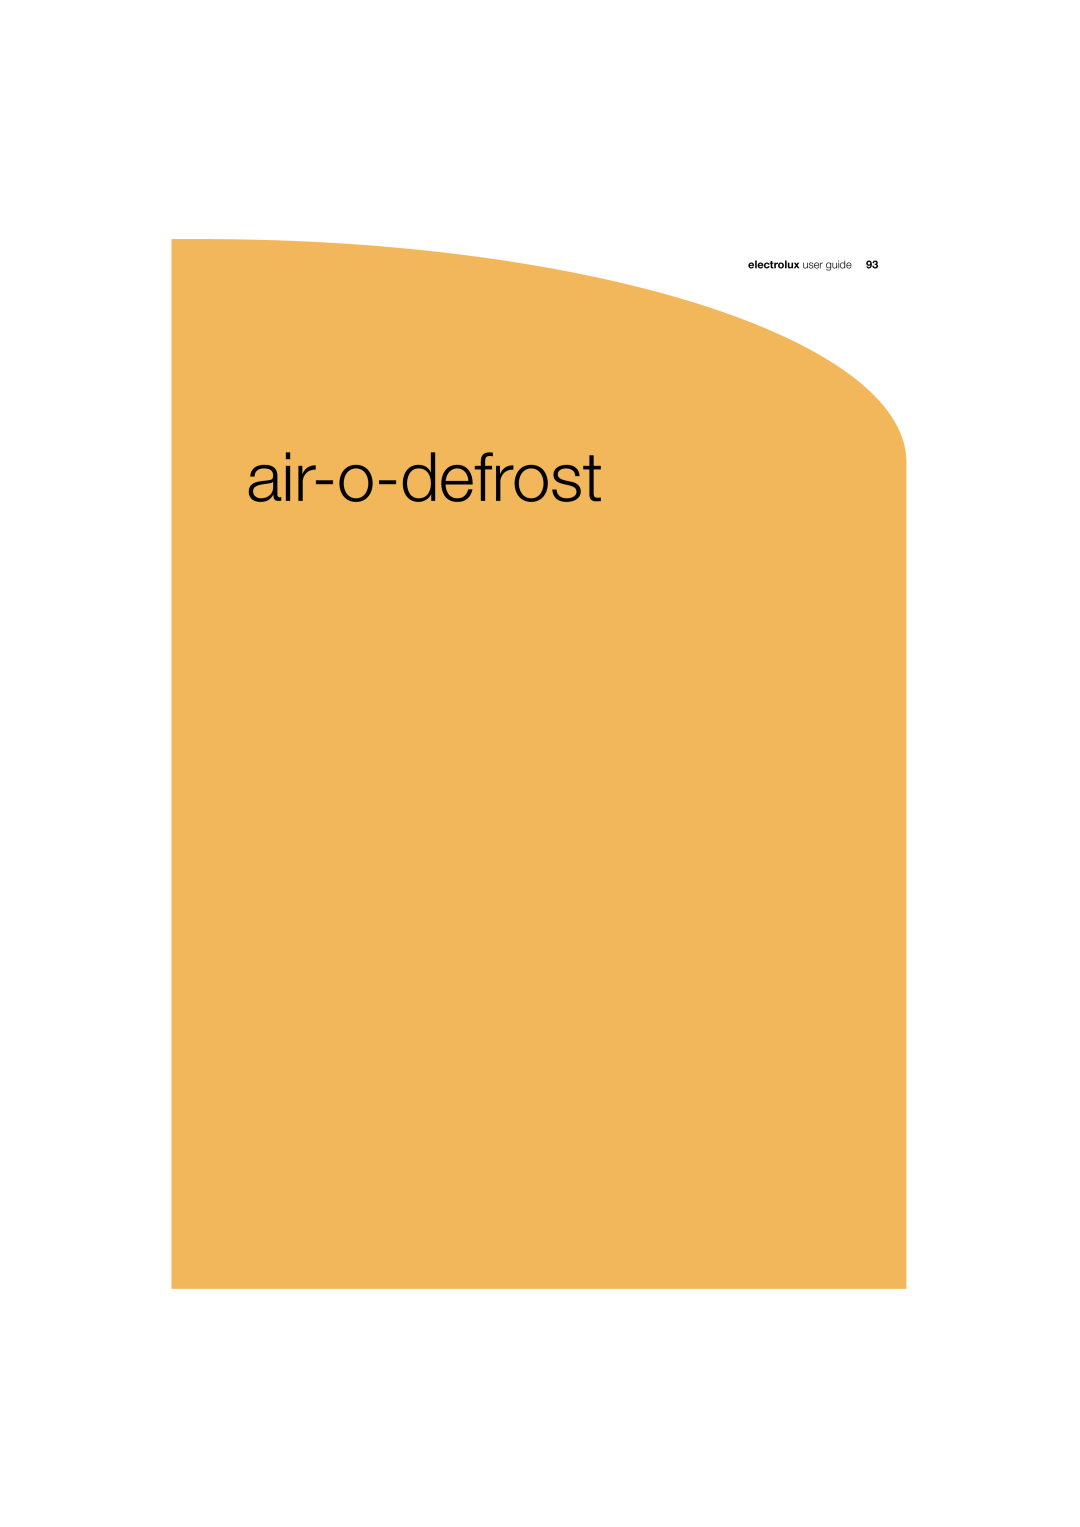 Electrolux 180 manual air-o-defrost, electrolux user guide 